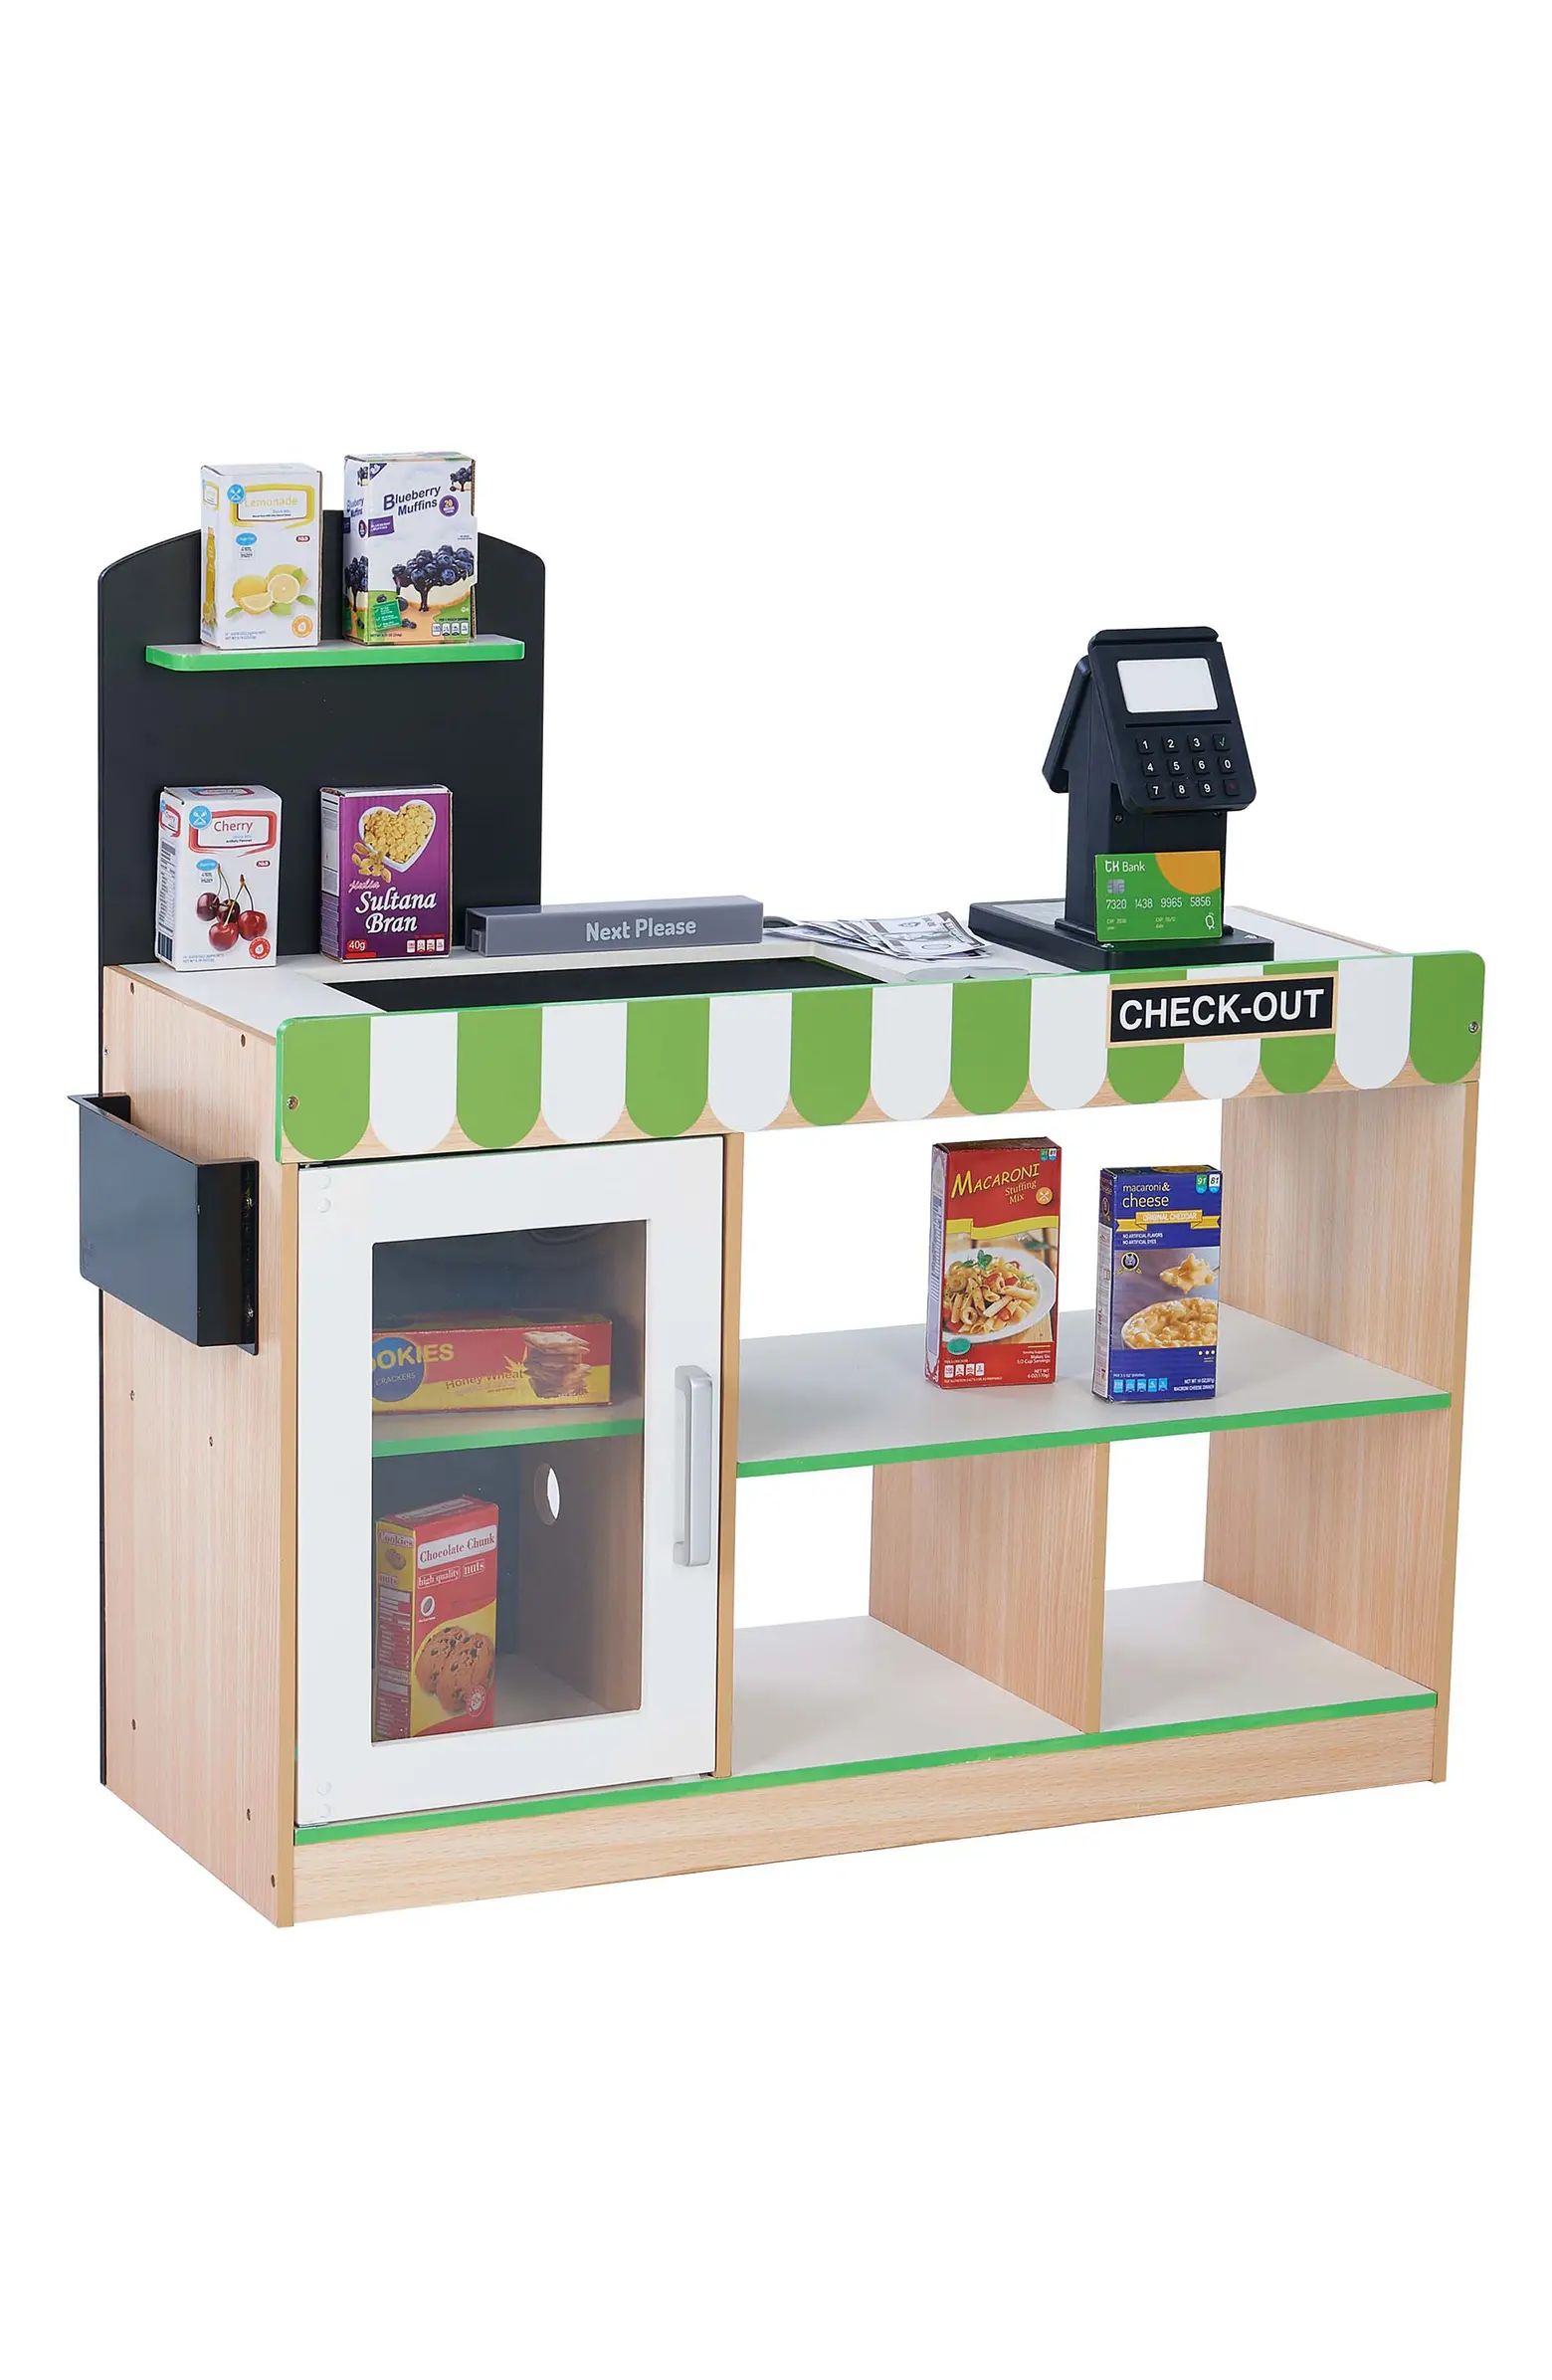 Cashier Austin Checkout Counter Stand Playset | Nordstrom